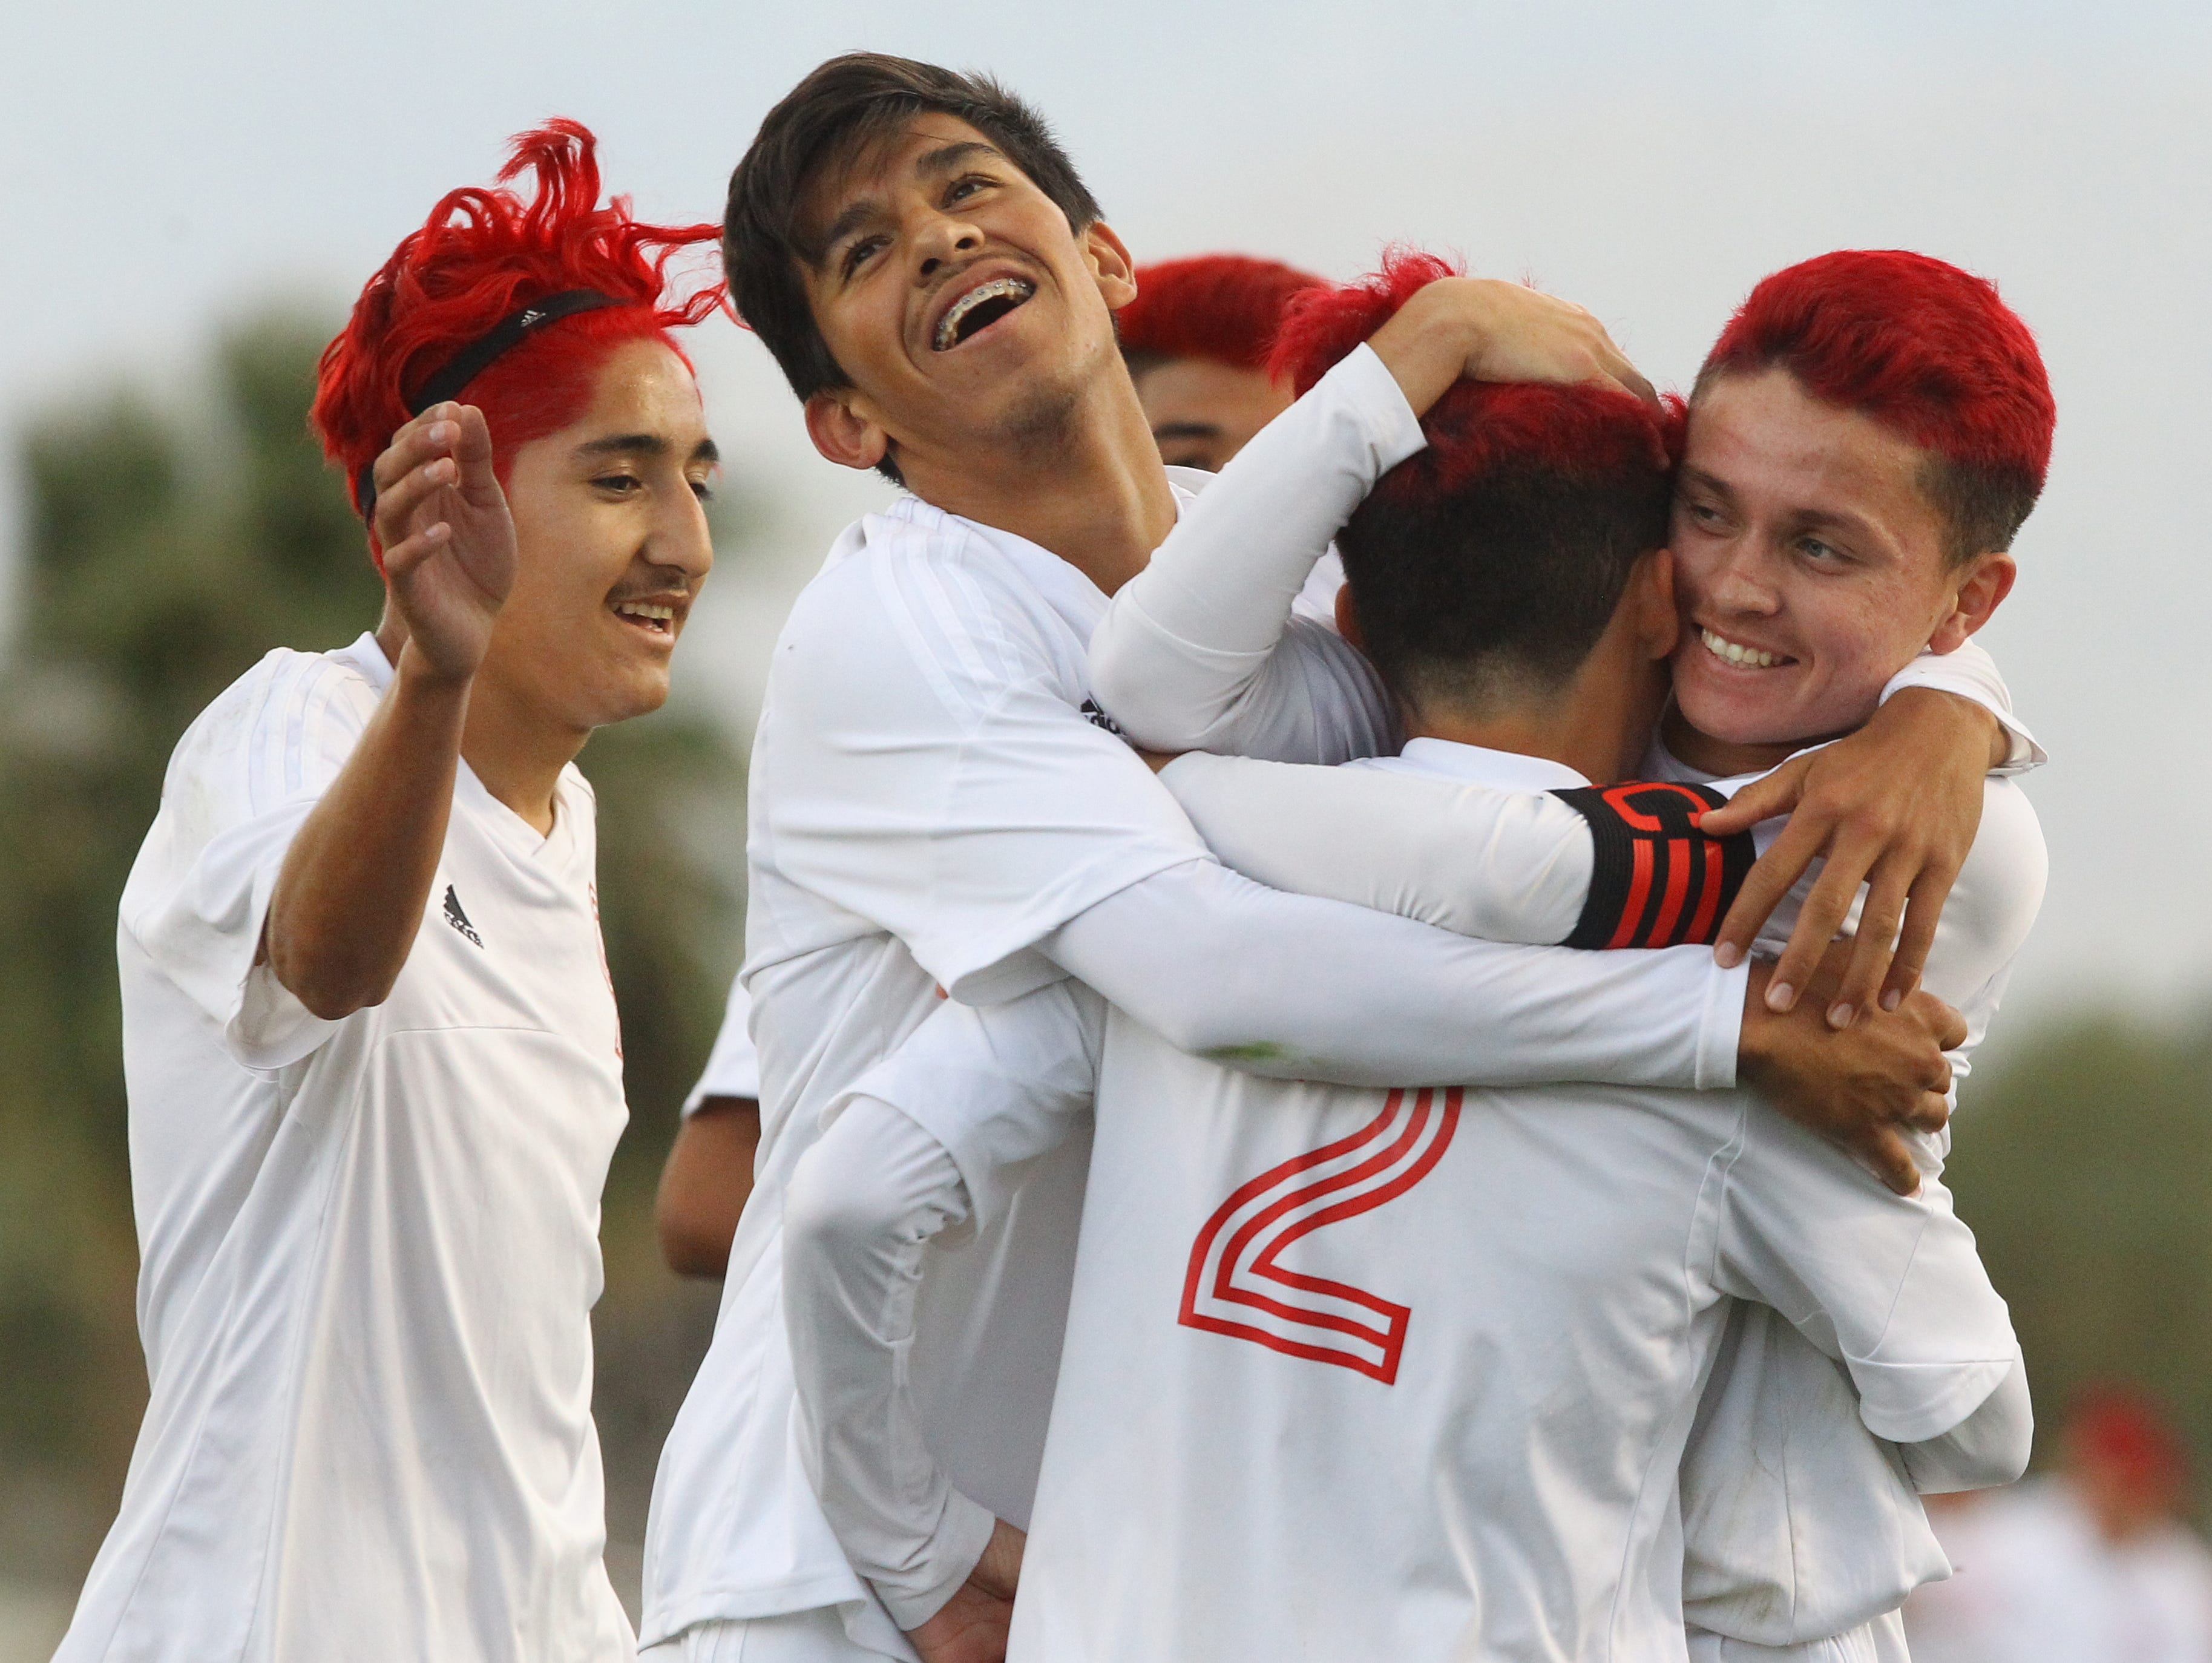 Desert Mirage High School's Erick Serrano is hugged by team mates after scoring the third goal of his team against Littlerock in Thermal on February February 16, 2017. Desert Mirage won 3-1.